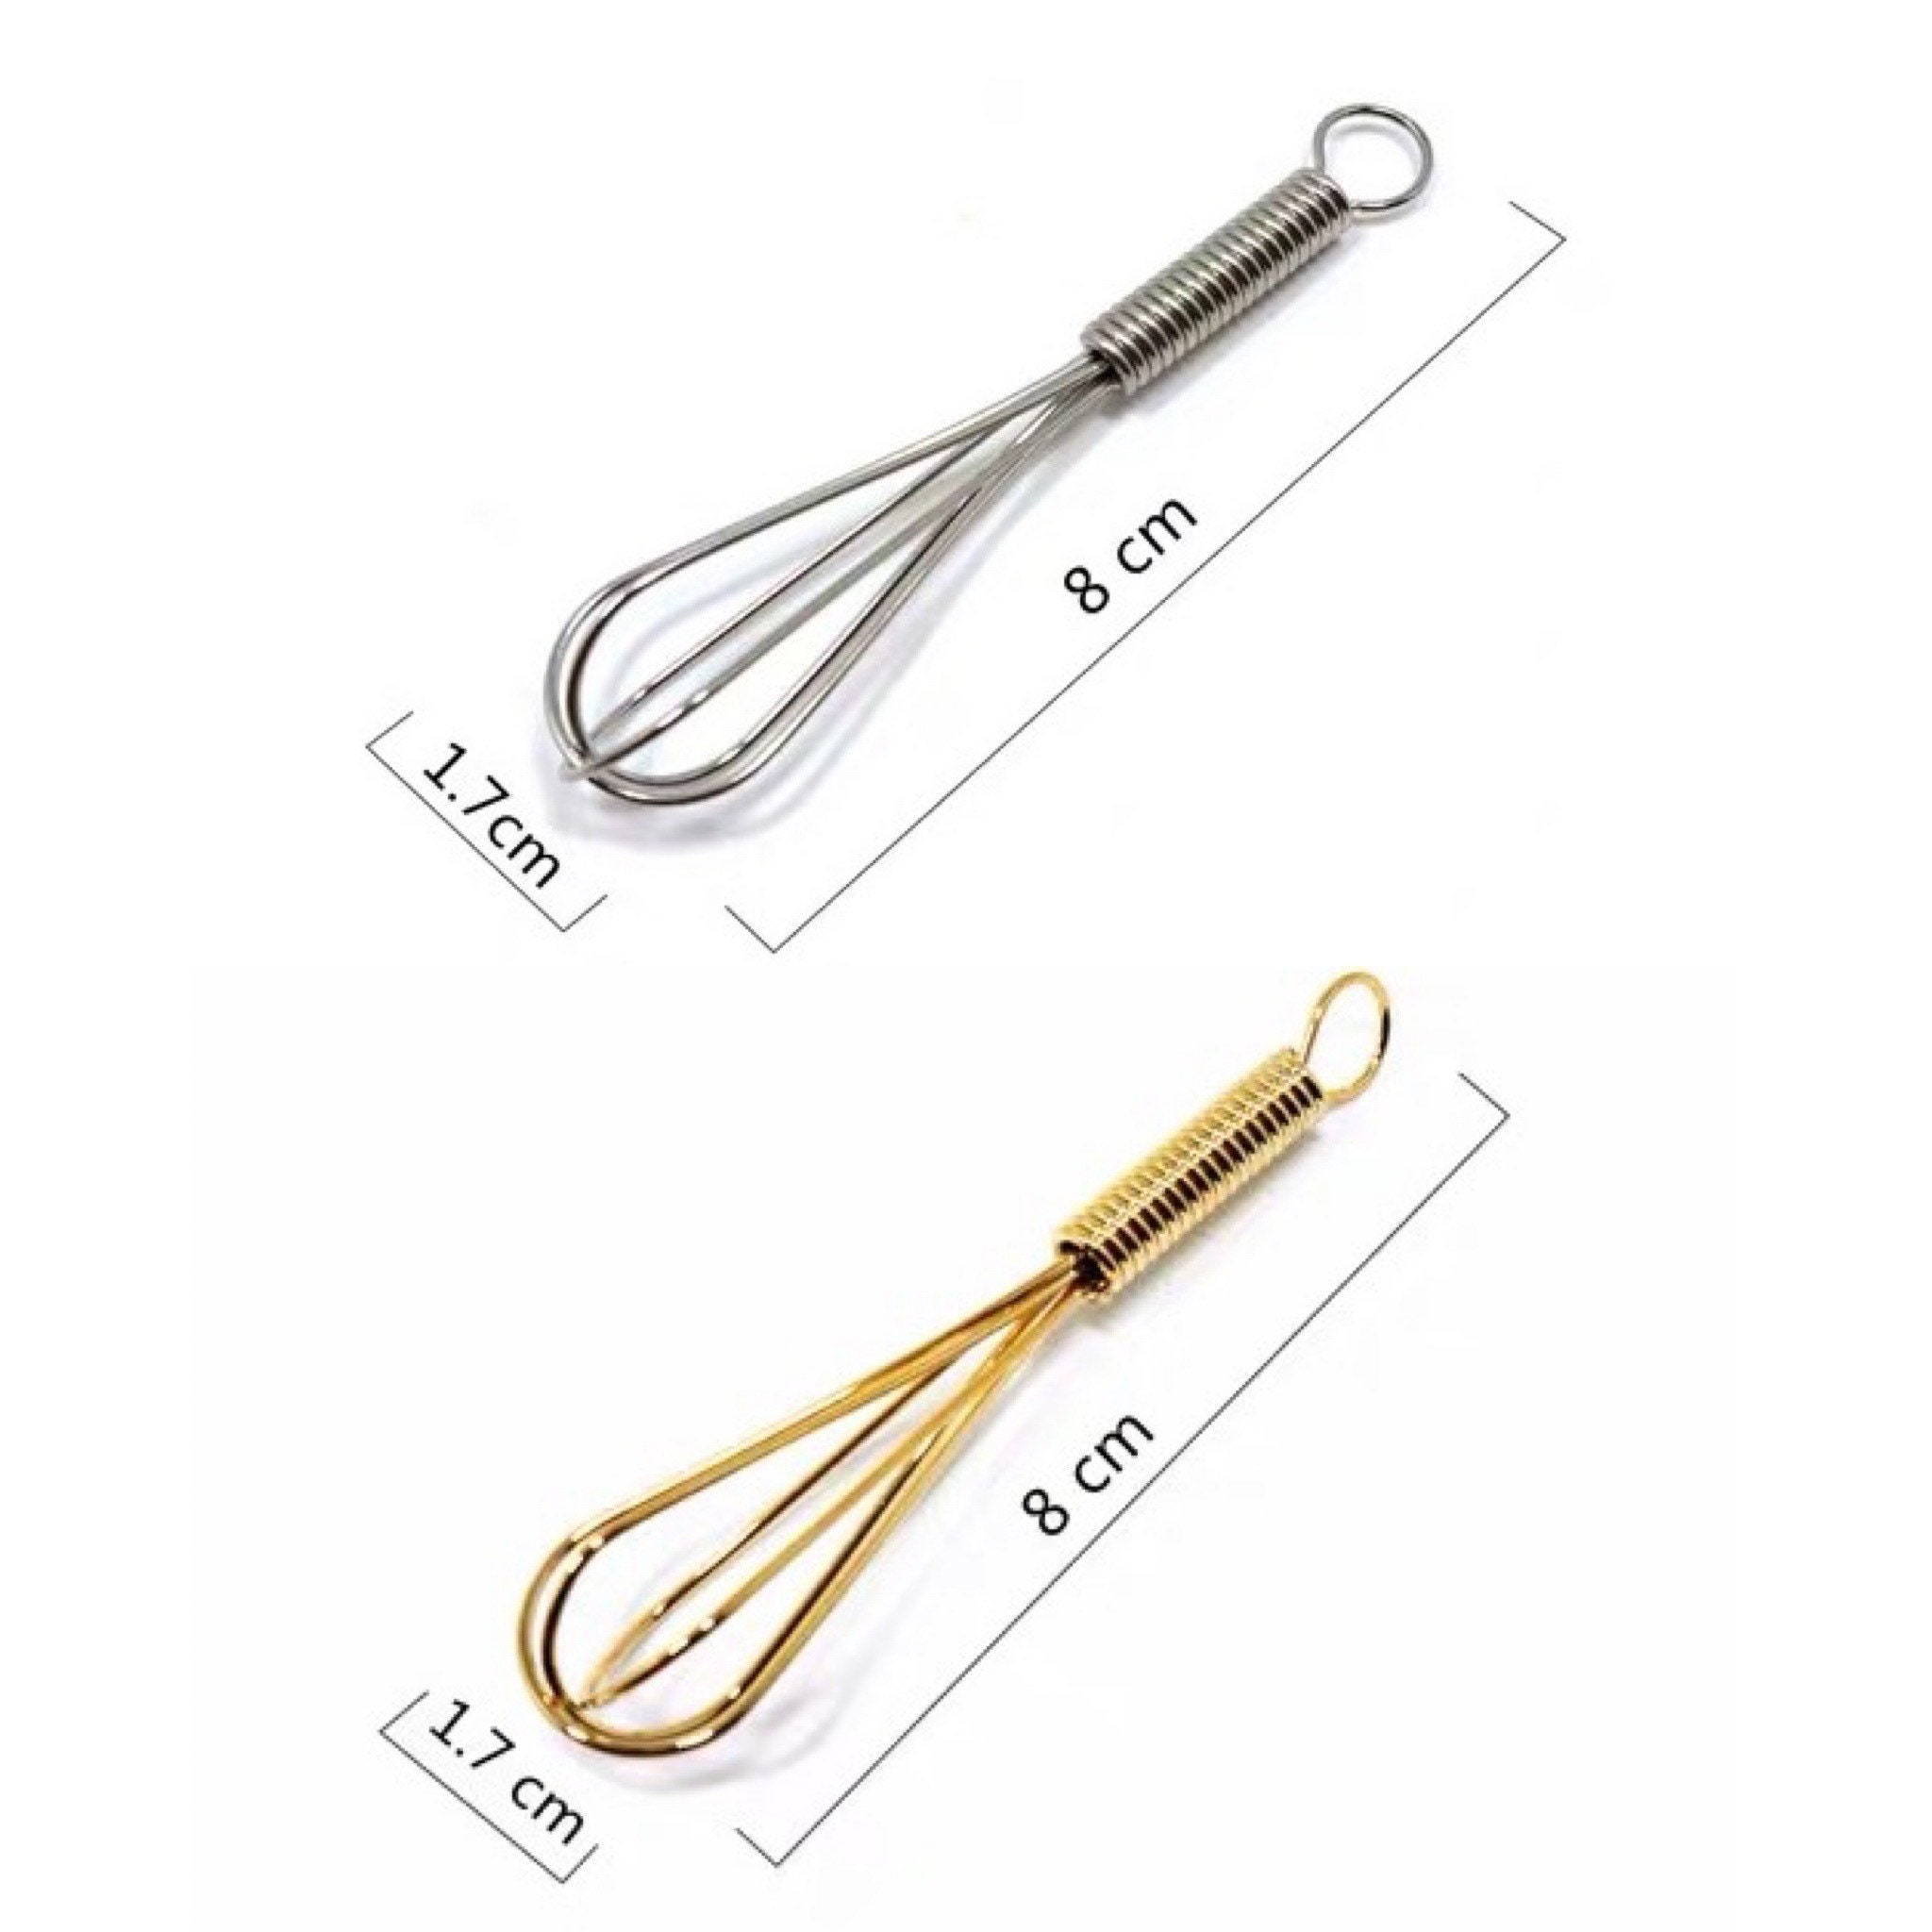 1 Pc / 5 Pcs Real Cooking Miniature Stainless Steel Egg Whisk length 8 Cm:  Gold / Silver // Message Us for Bulk Order Inquiries. 